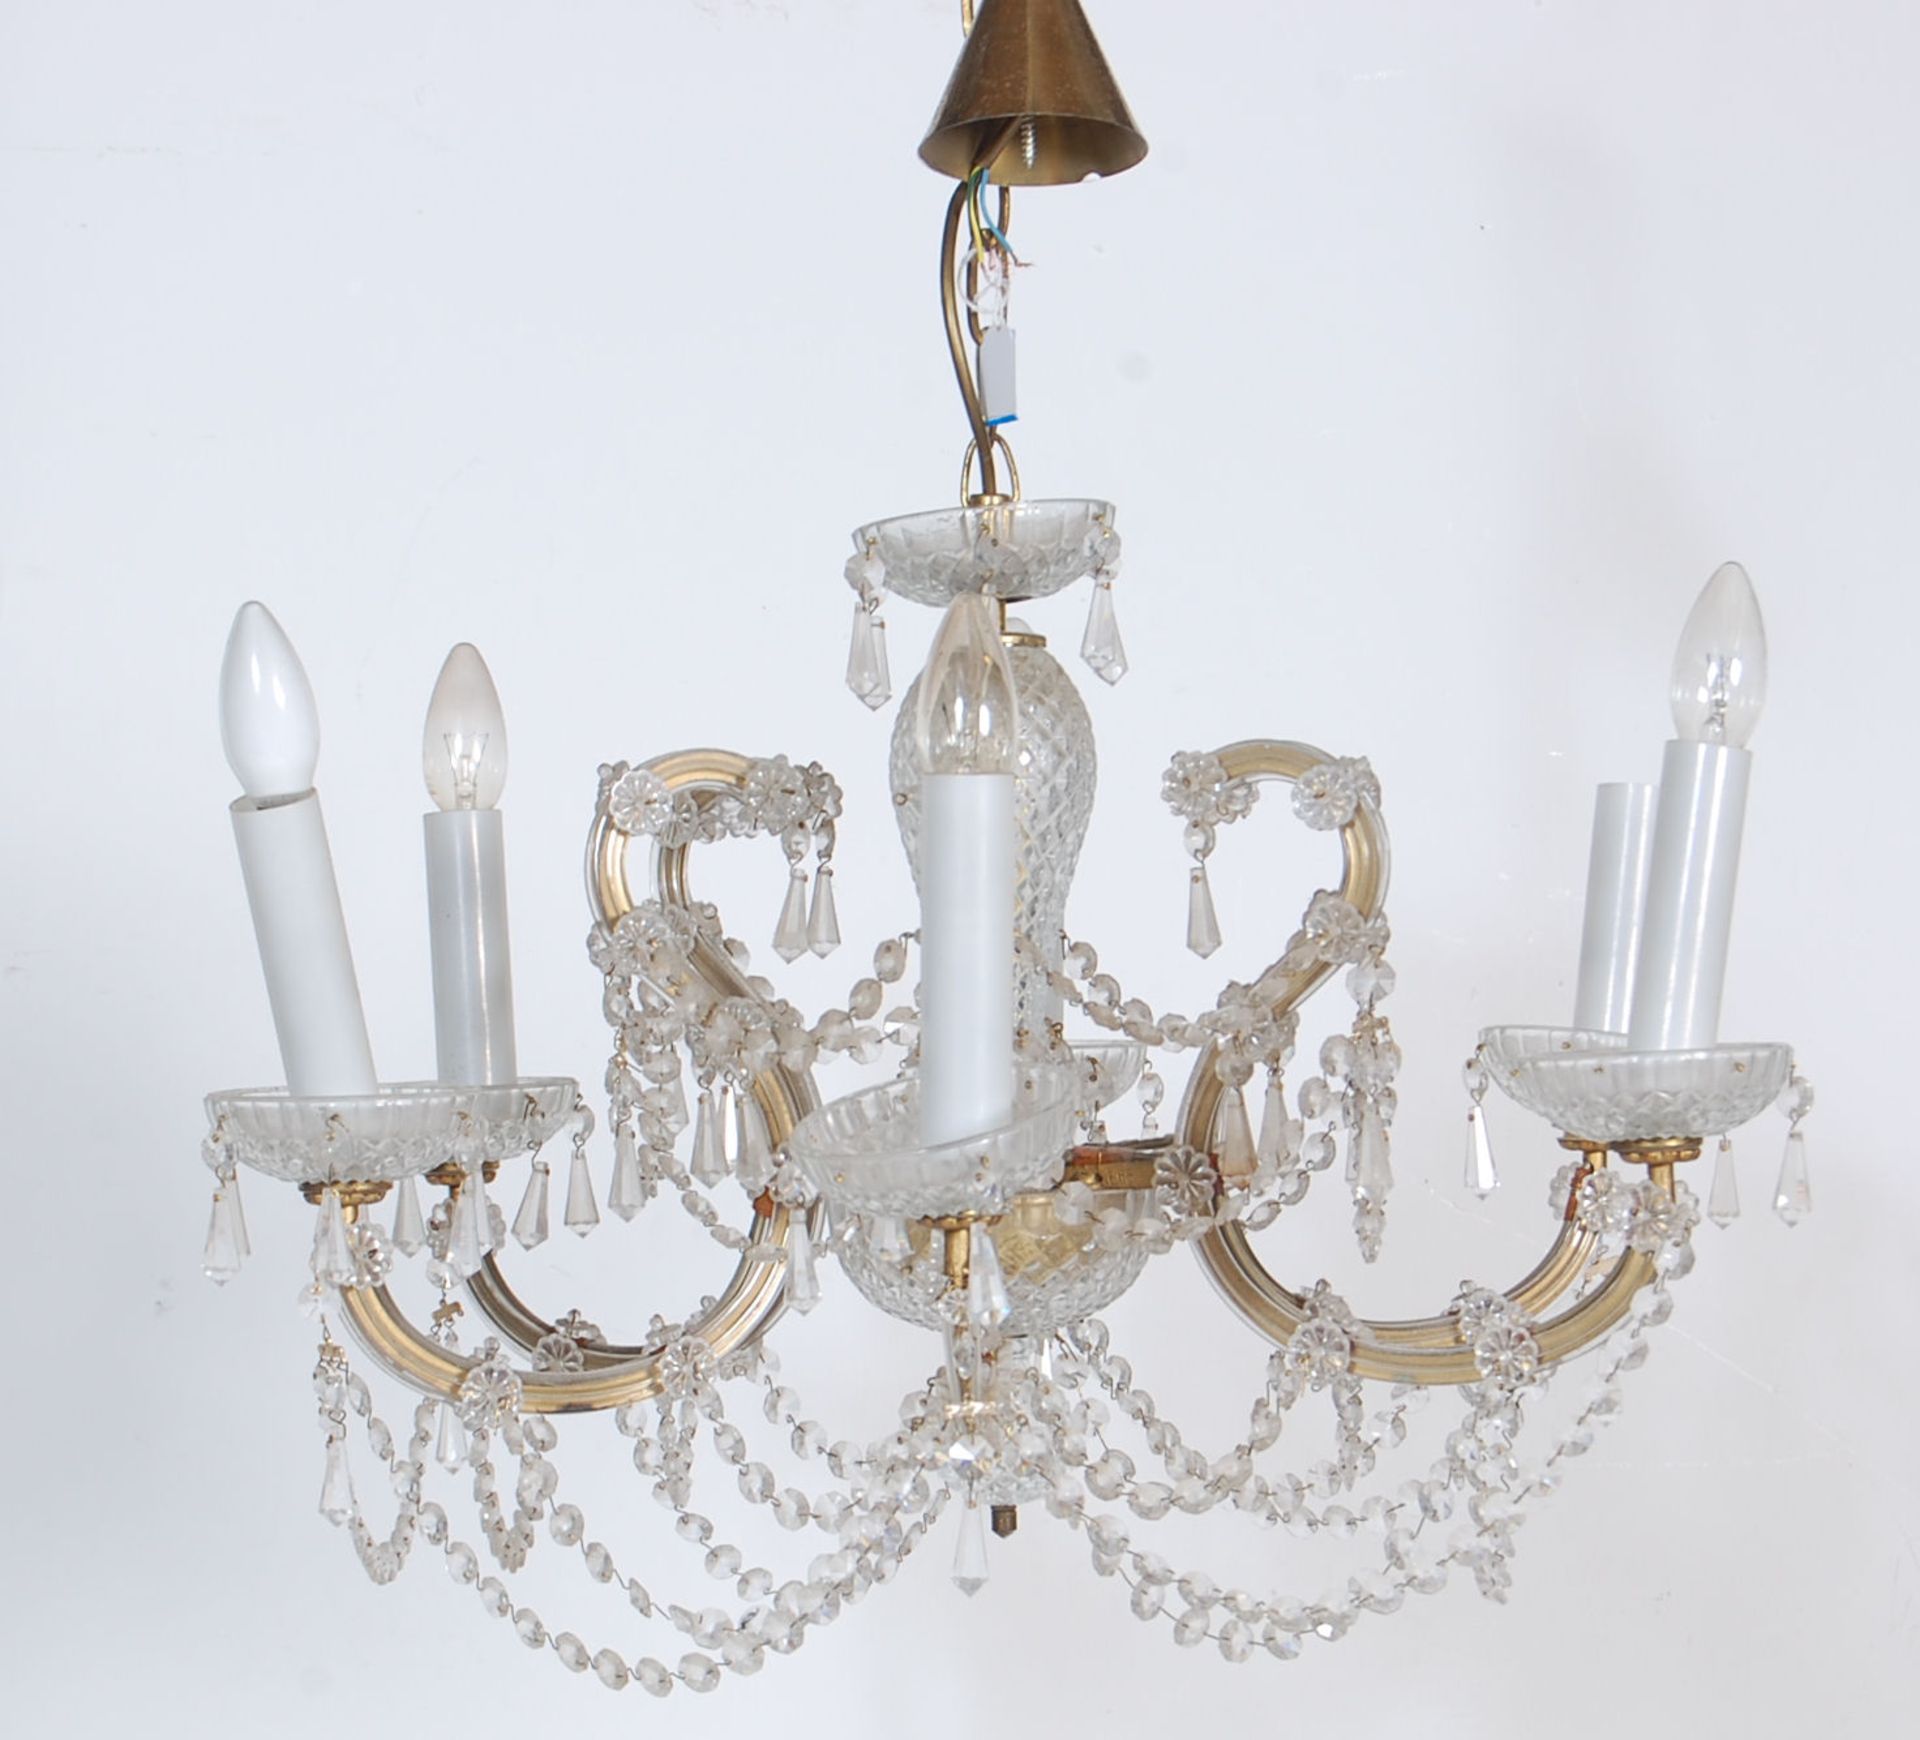 A 20th Century Italian cut glass ceiling chandelier having six branch arms with faux electric